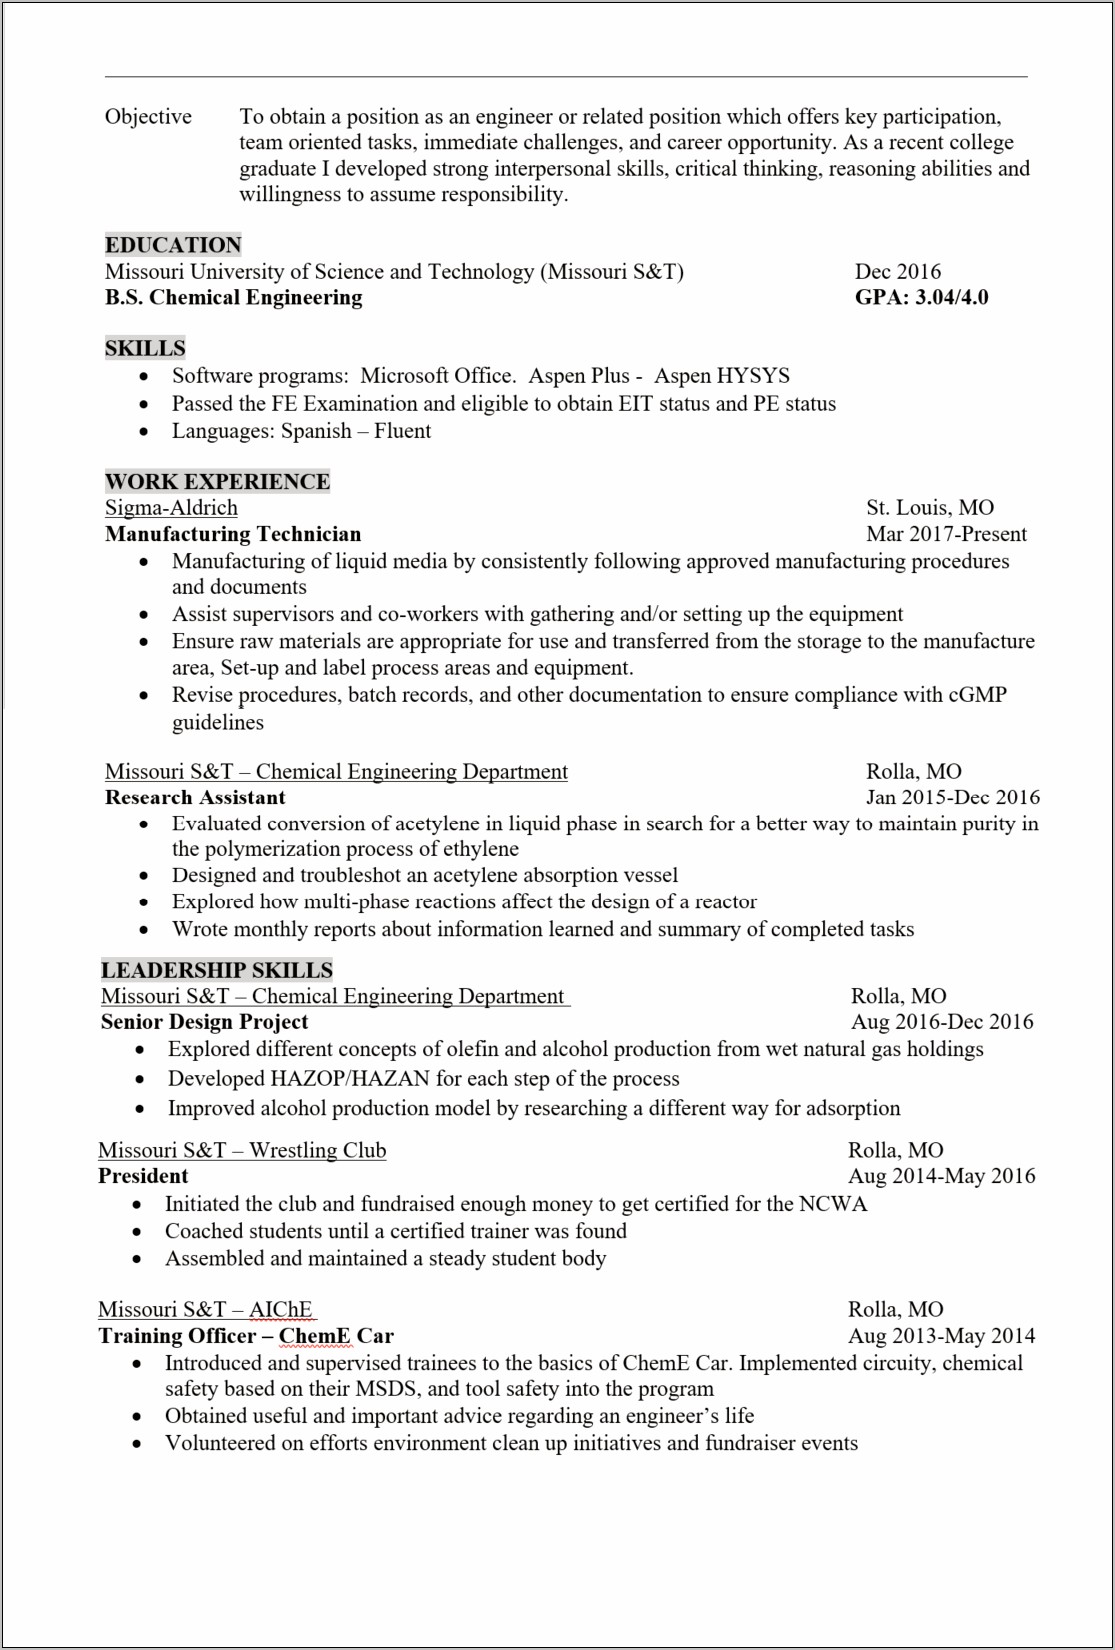 Skills Section For Chemical Engineering Resume